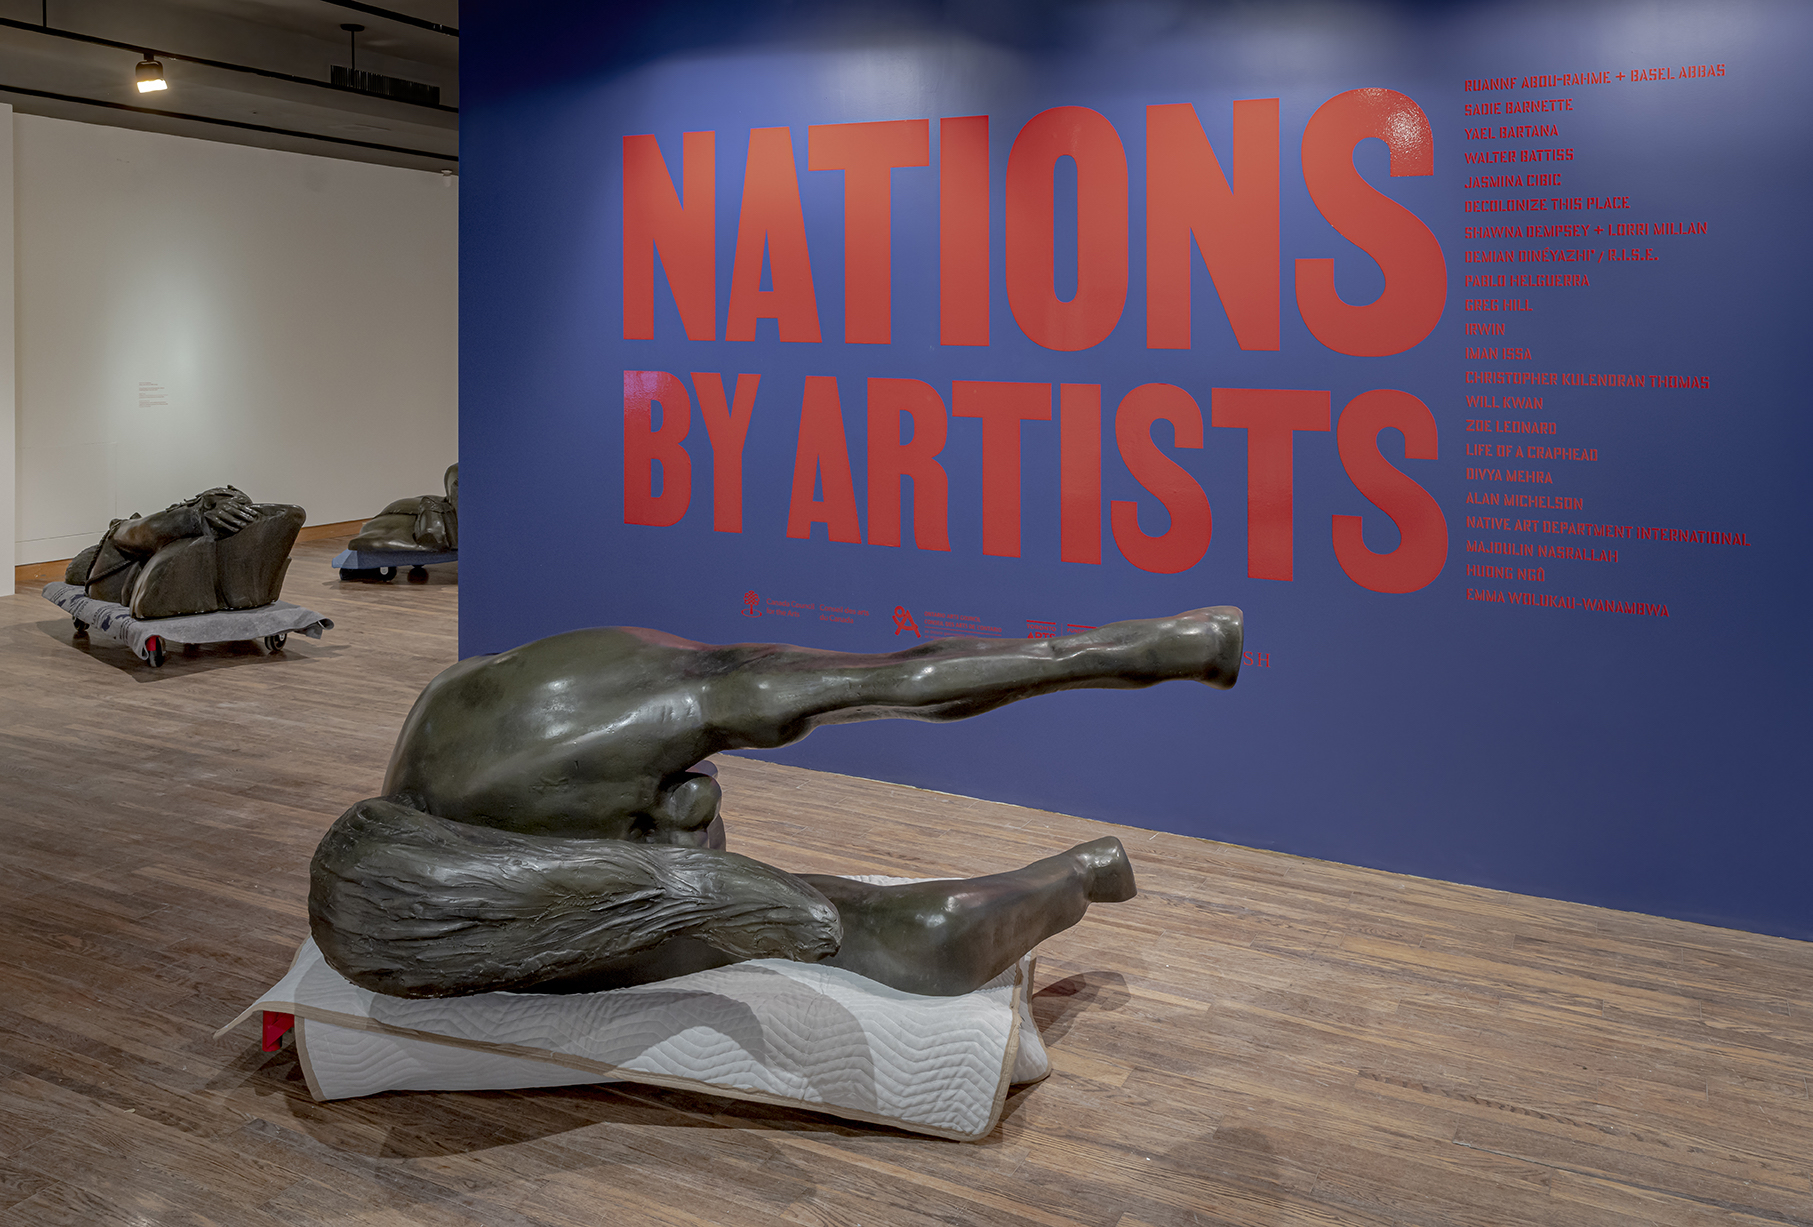 A monument replica is displaye din front of a sign for Nations by Artists exhibit at the Art Museum of University of Toronto